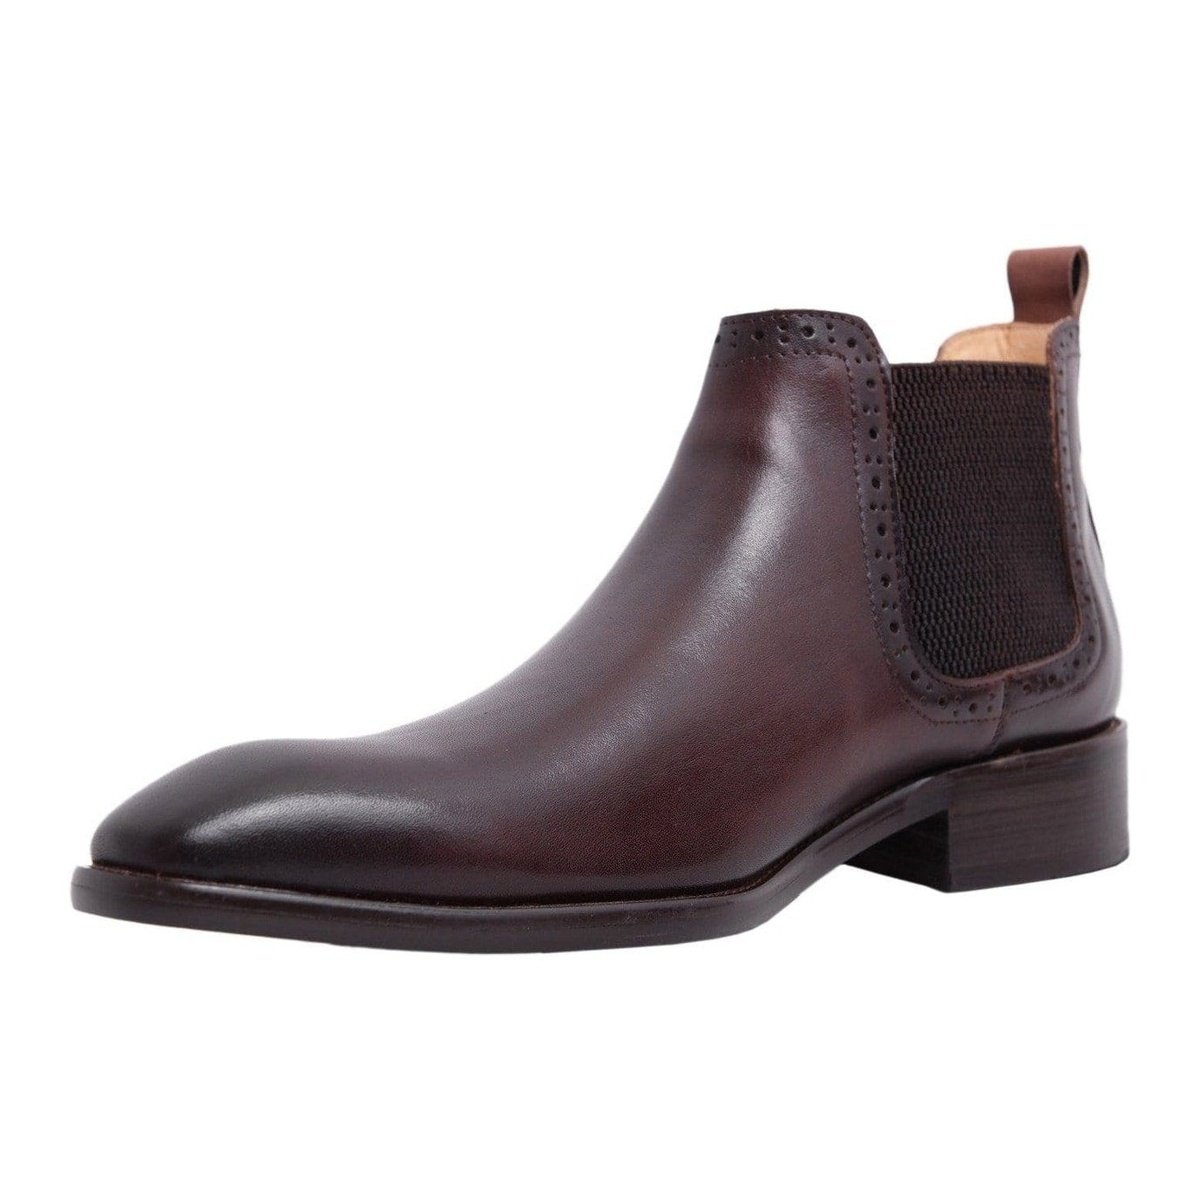 Carrucci Carrucci Mens Chestnut Brown Slip-on Chelsea Leather Dress Boots